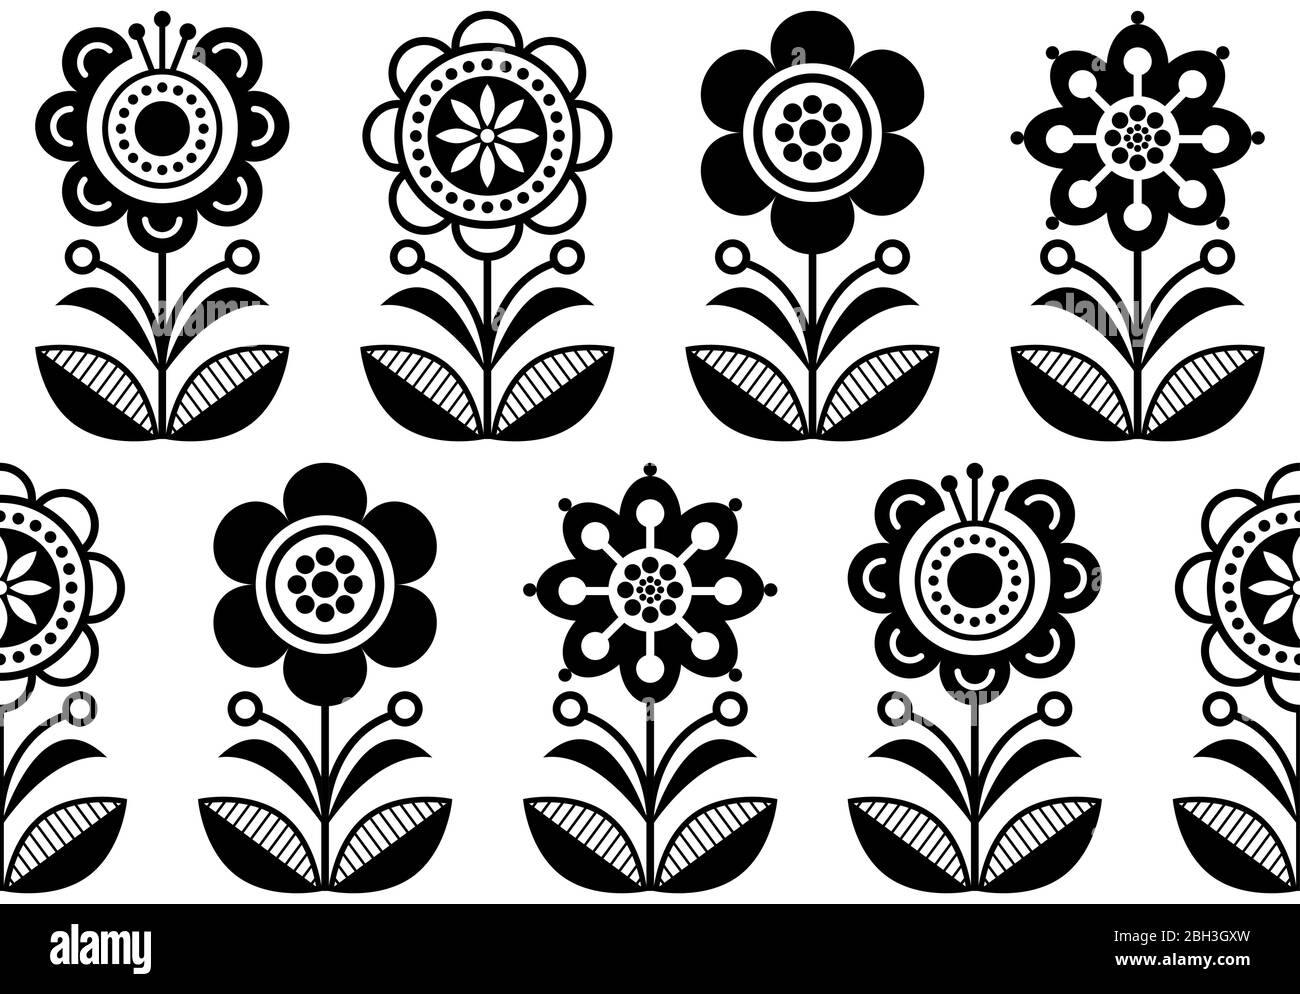 Folk art flowers, seamless vector floral pattern, Scandinavian black and white repetitive design, Nordic ornament, Floral retro background flowers ins Stock Vector